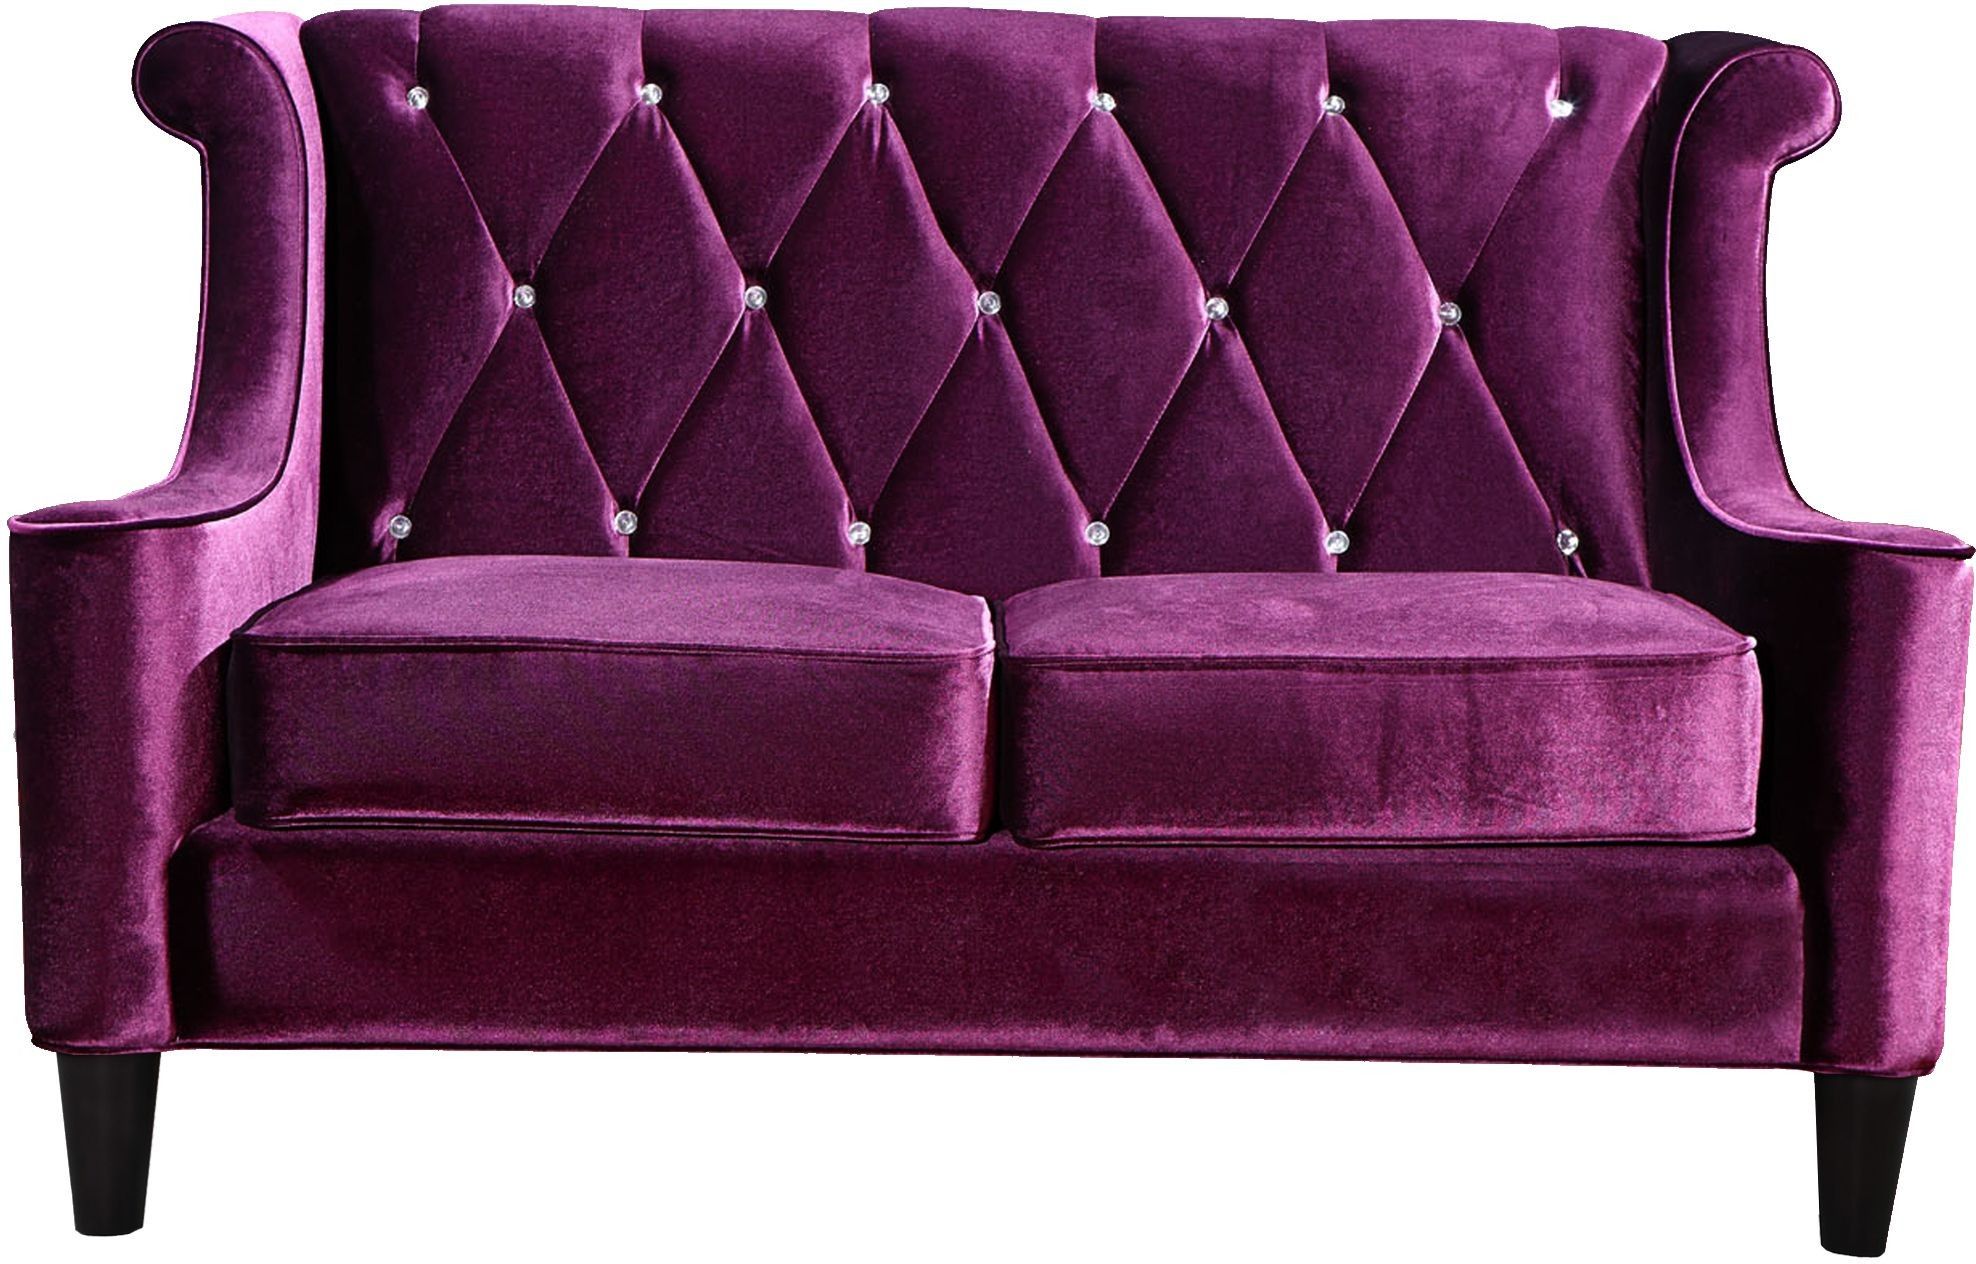 Barrister Purple Velvet Loveseat From Armen Living | Coleman Furniture With Regard To Small Love Seats In Velvet (Gallery 5 of 21)